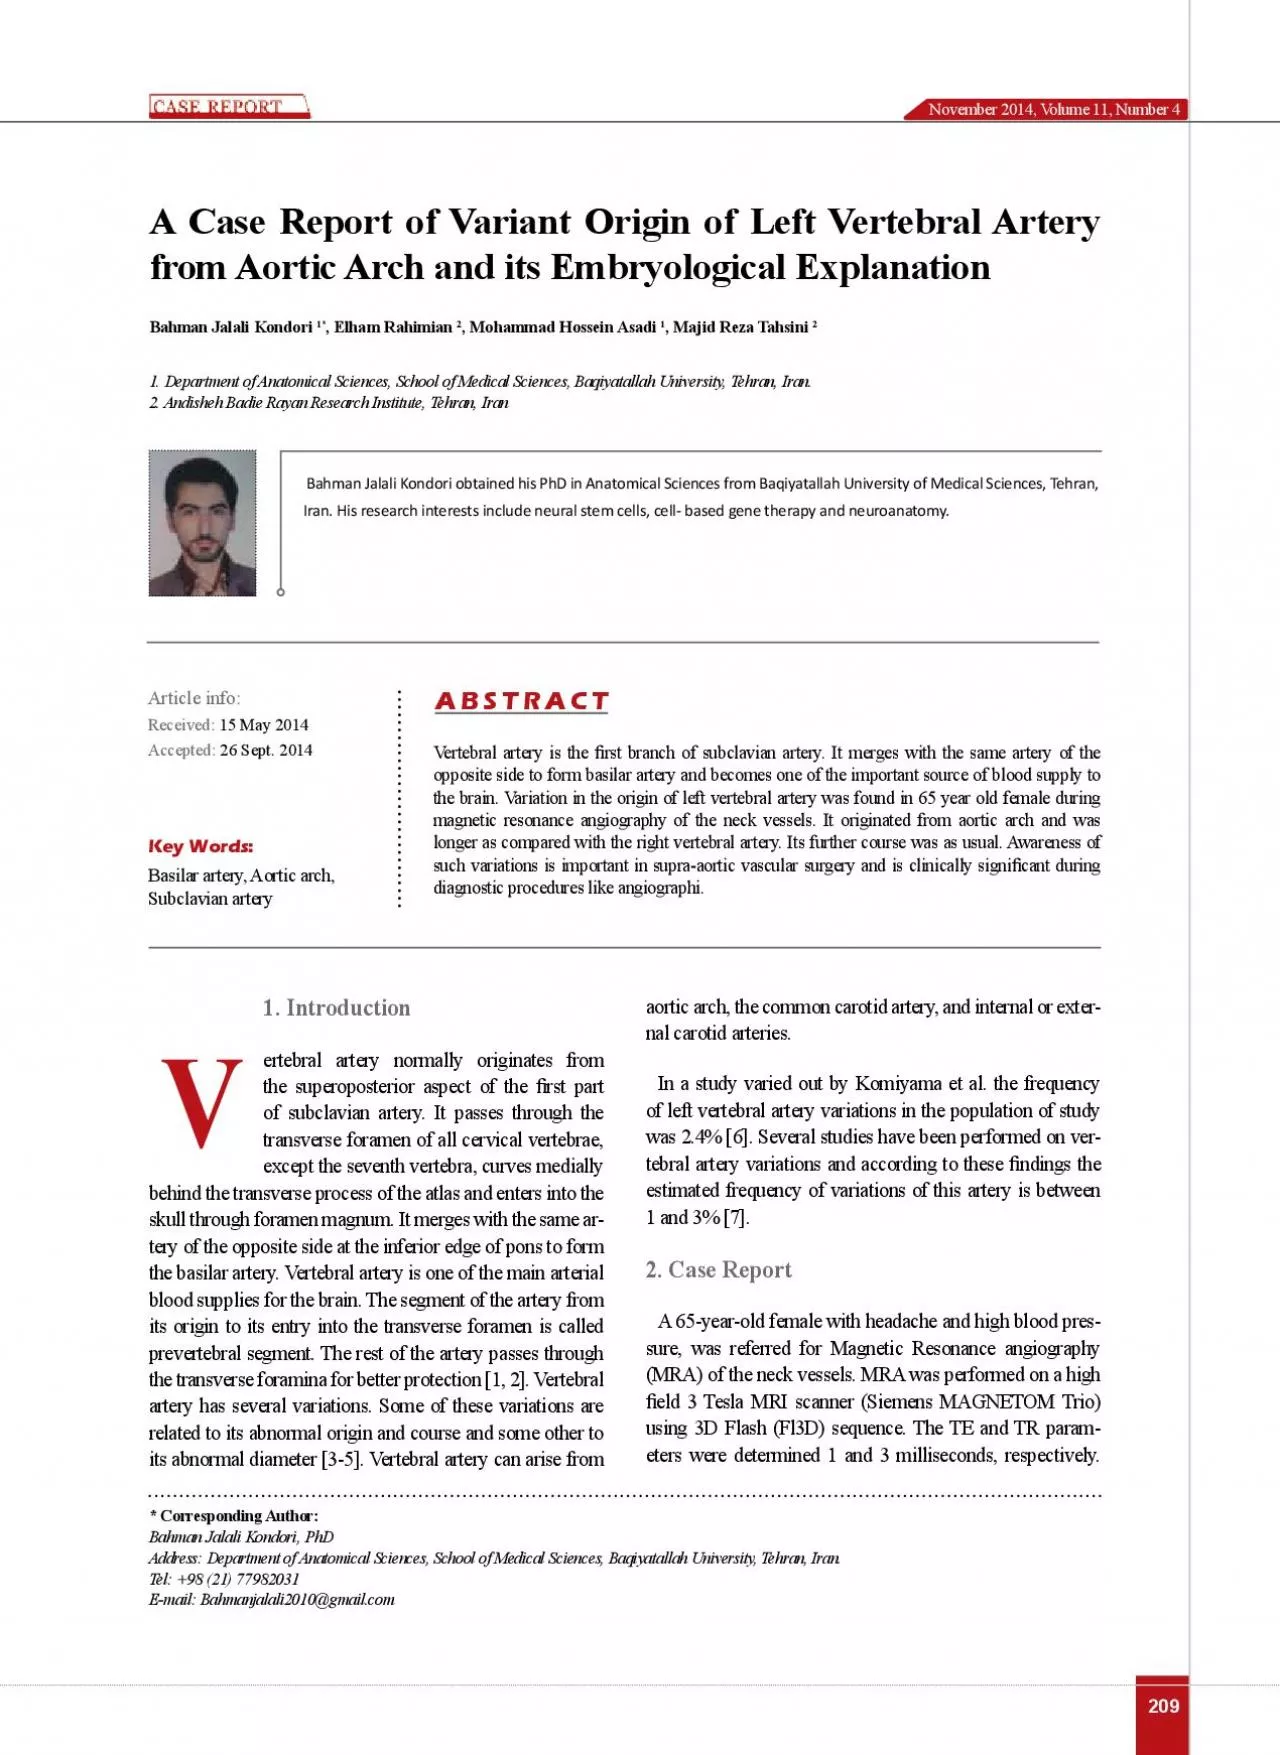 A Case Report of Variant Origin of Left Vertebral Artery from Aortic A